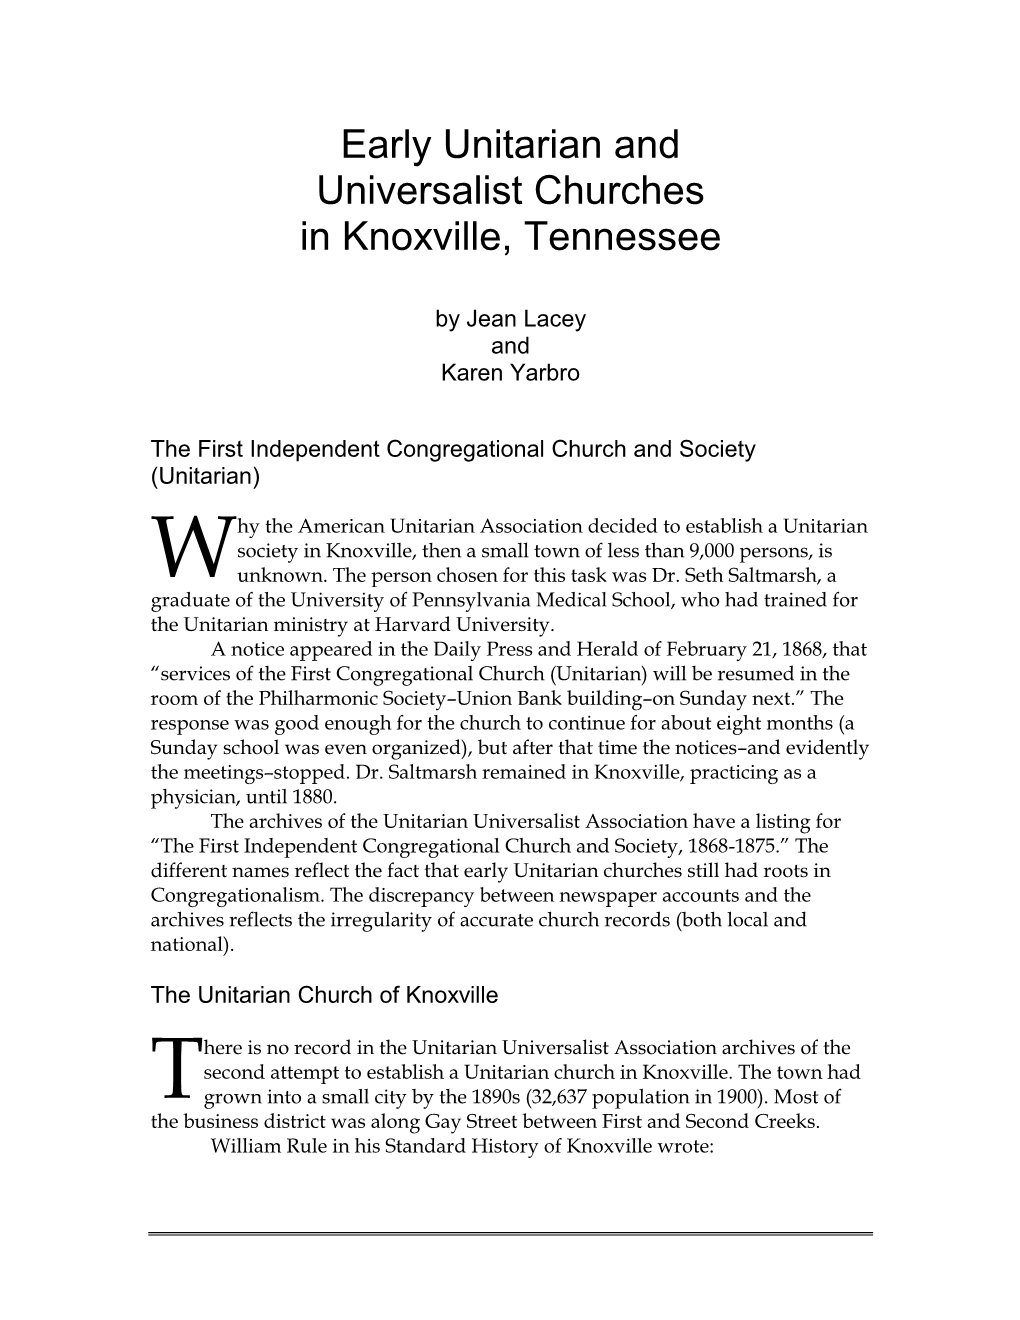 Early Unitarian and Universalist Churches in Knoxville, TN